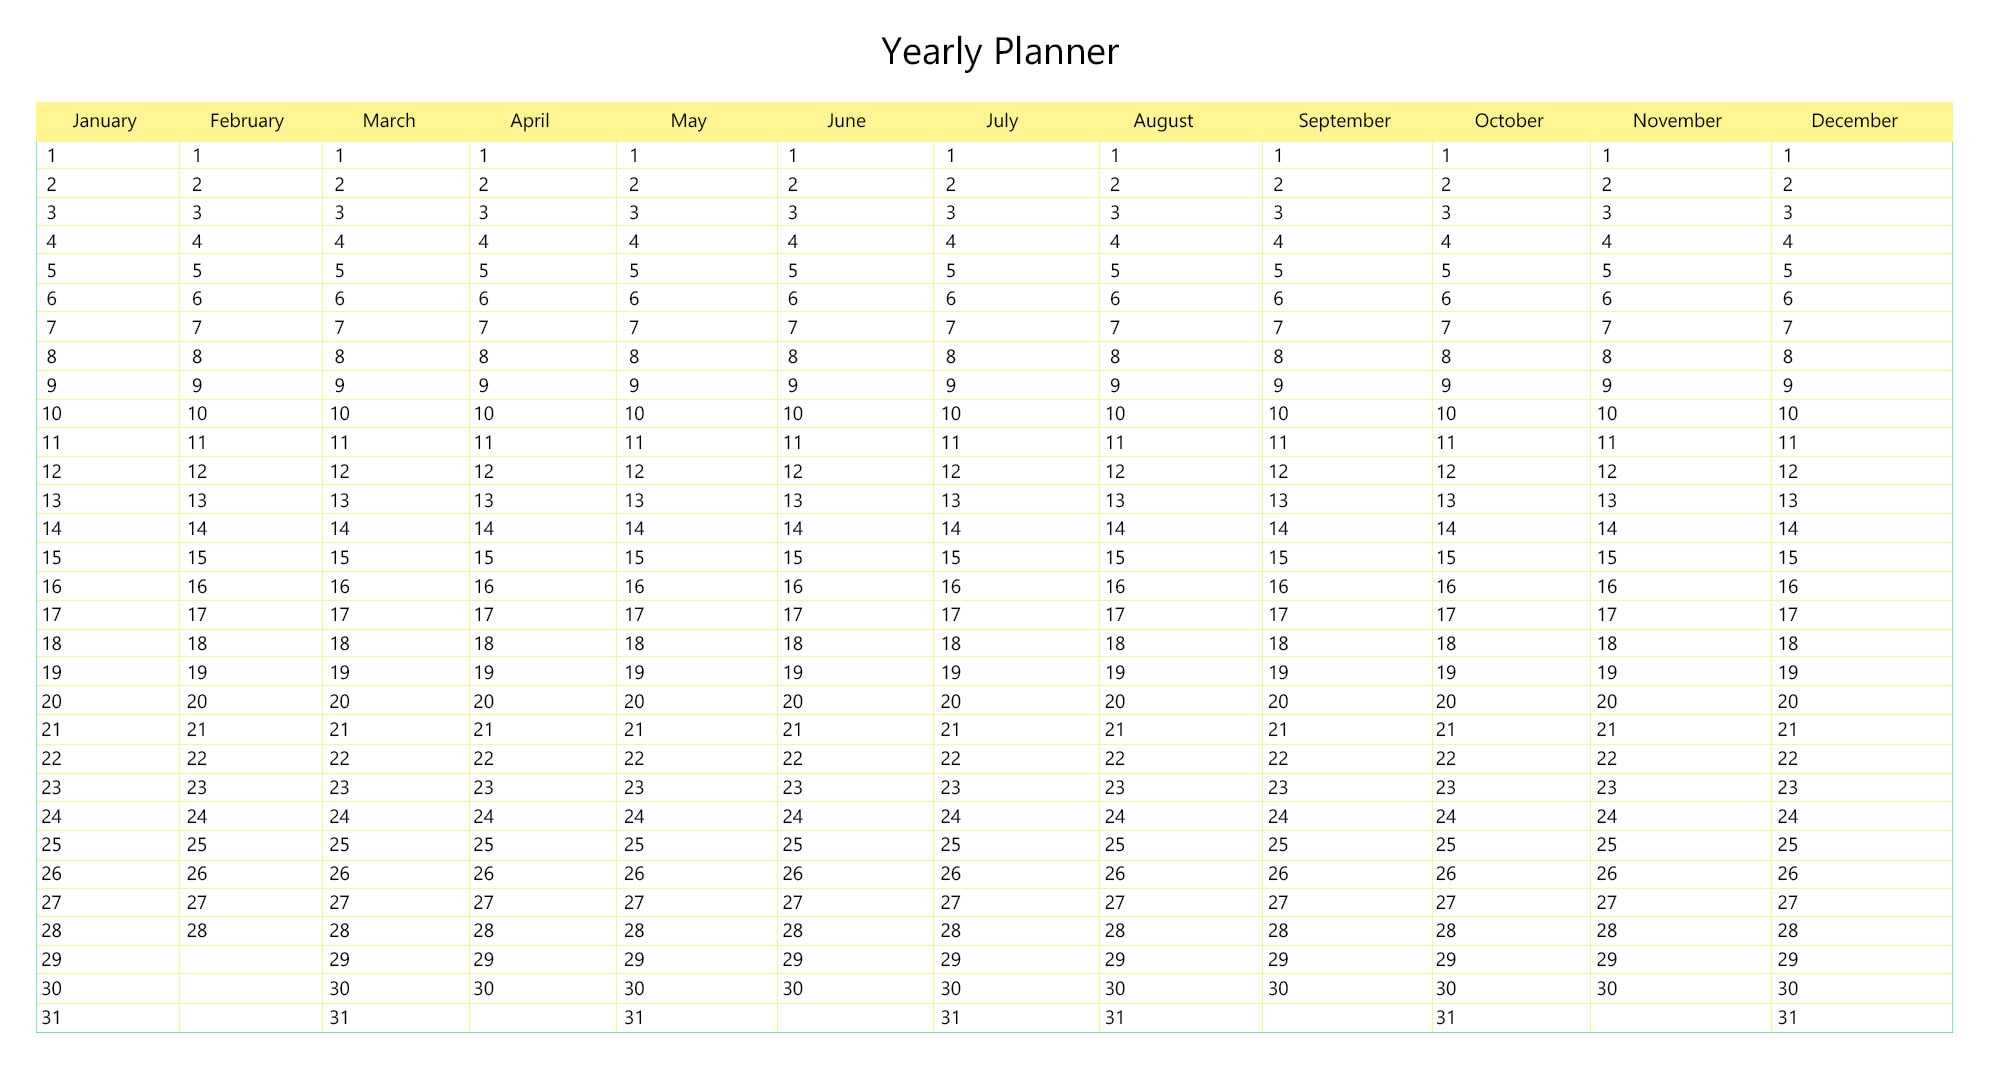 How To Make A Yearly Calendar In Excel Without Template